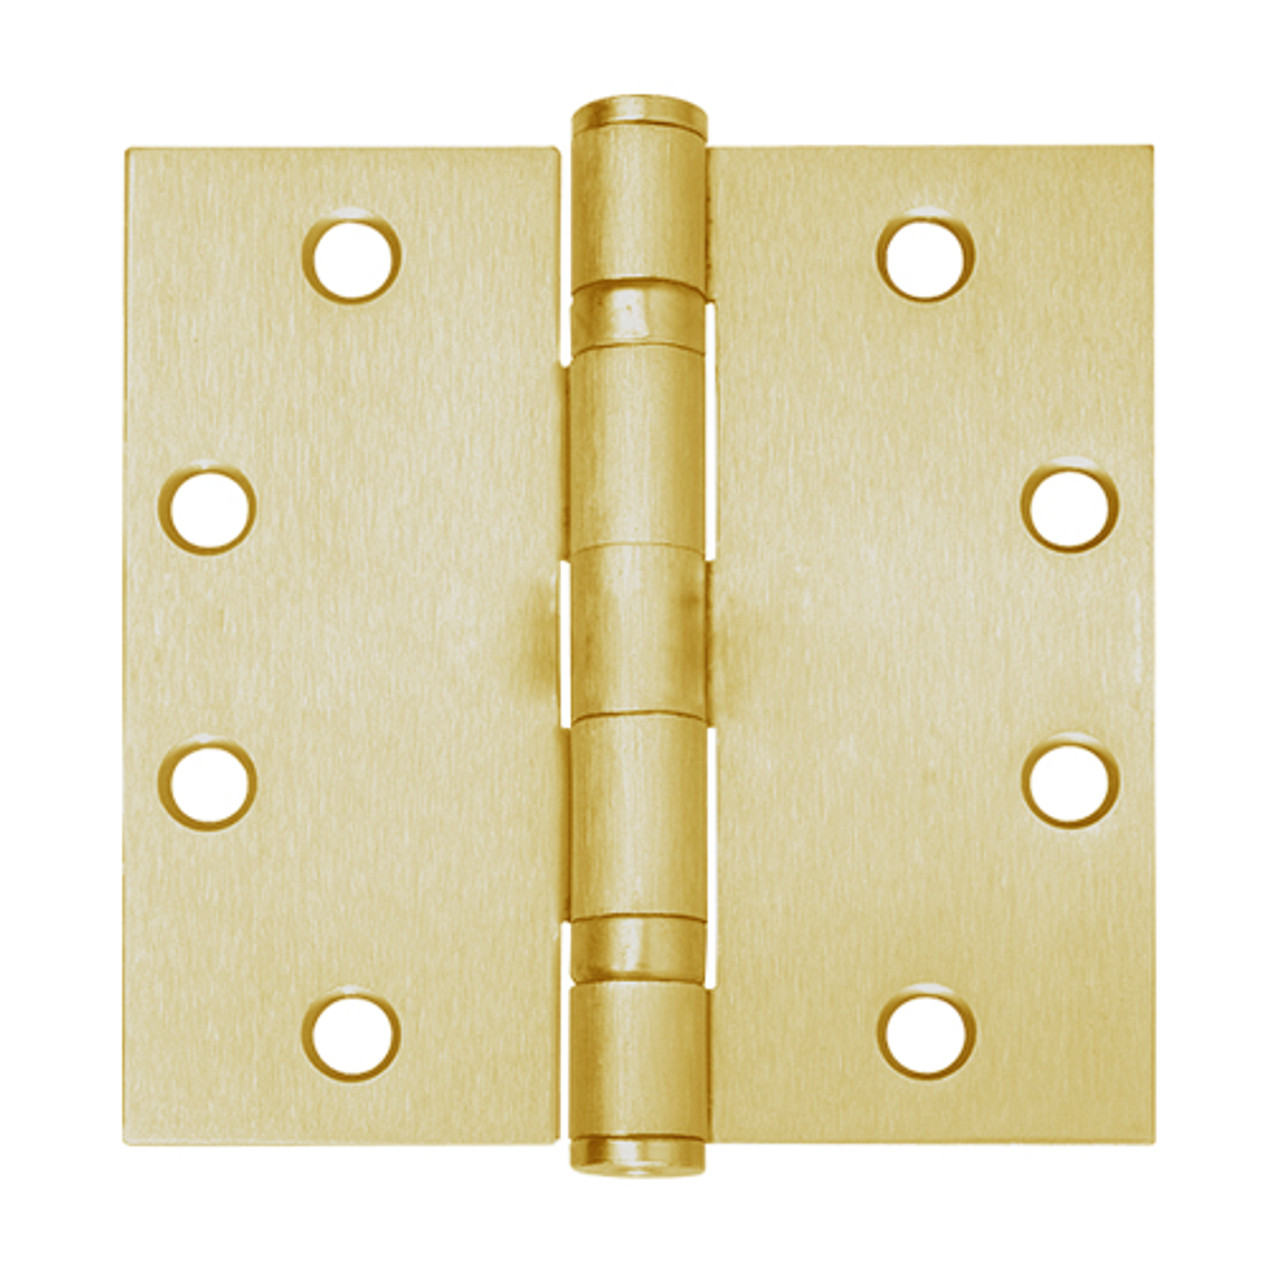 5BB1-5x4-5-633-TW4 IVES 5 Knuckle Ball Bearing Full Mortise Hinge with Electric Thru-Wire in Satin Brass Plated